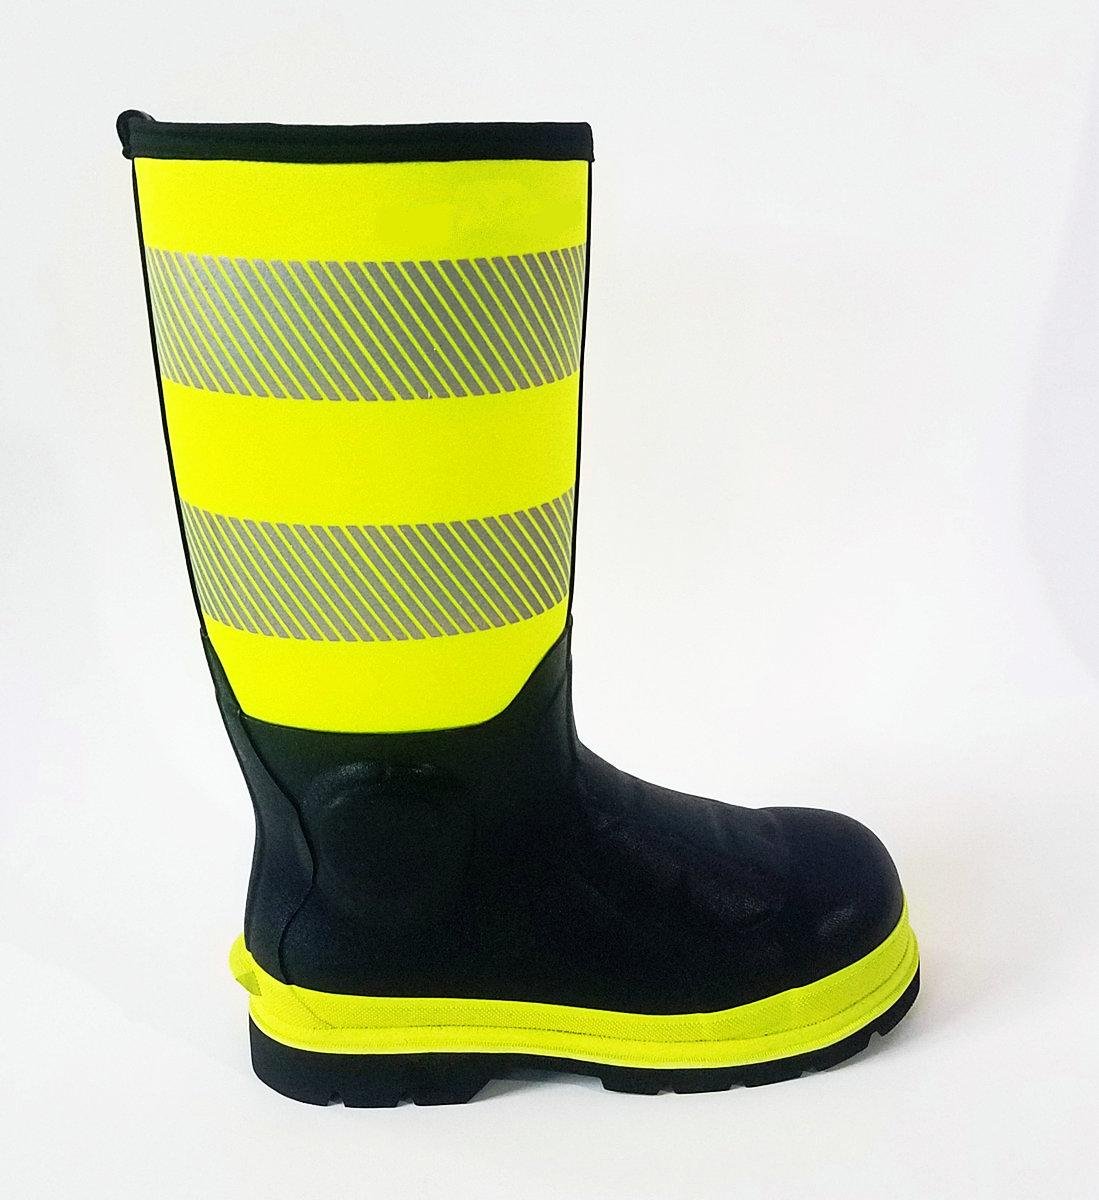 High visibility Safety Boot Handmade of natural rubber Protective toe cap Perfor